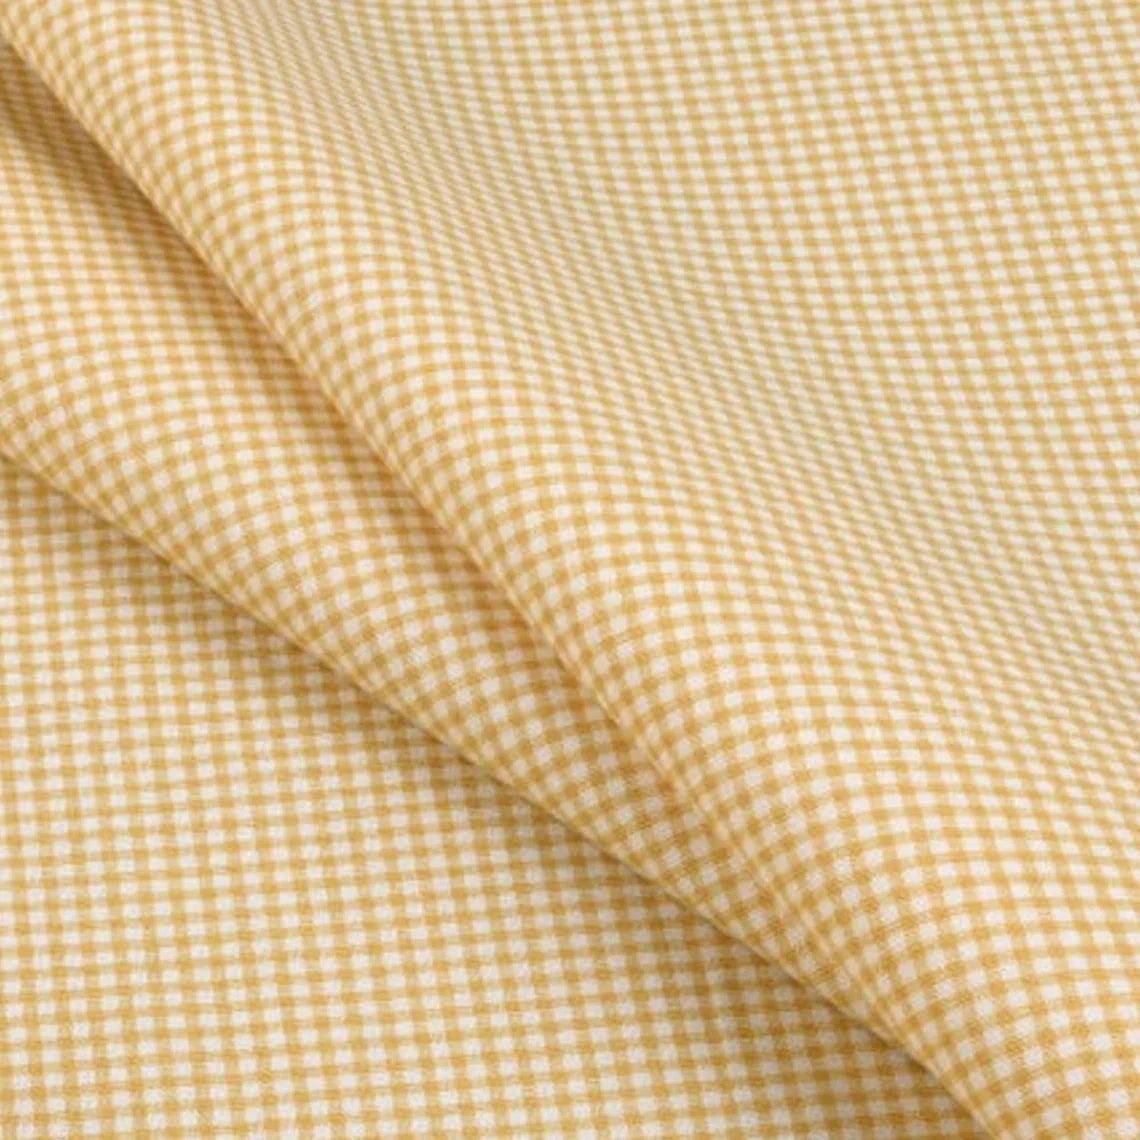 Tie-up Valance in Farmhouse Barley Yellow Gold Gingham Check